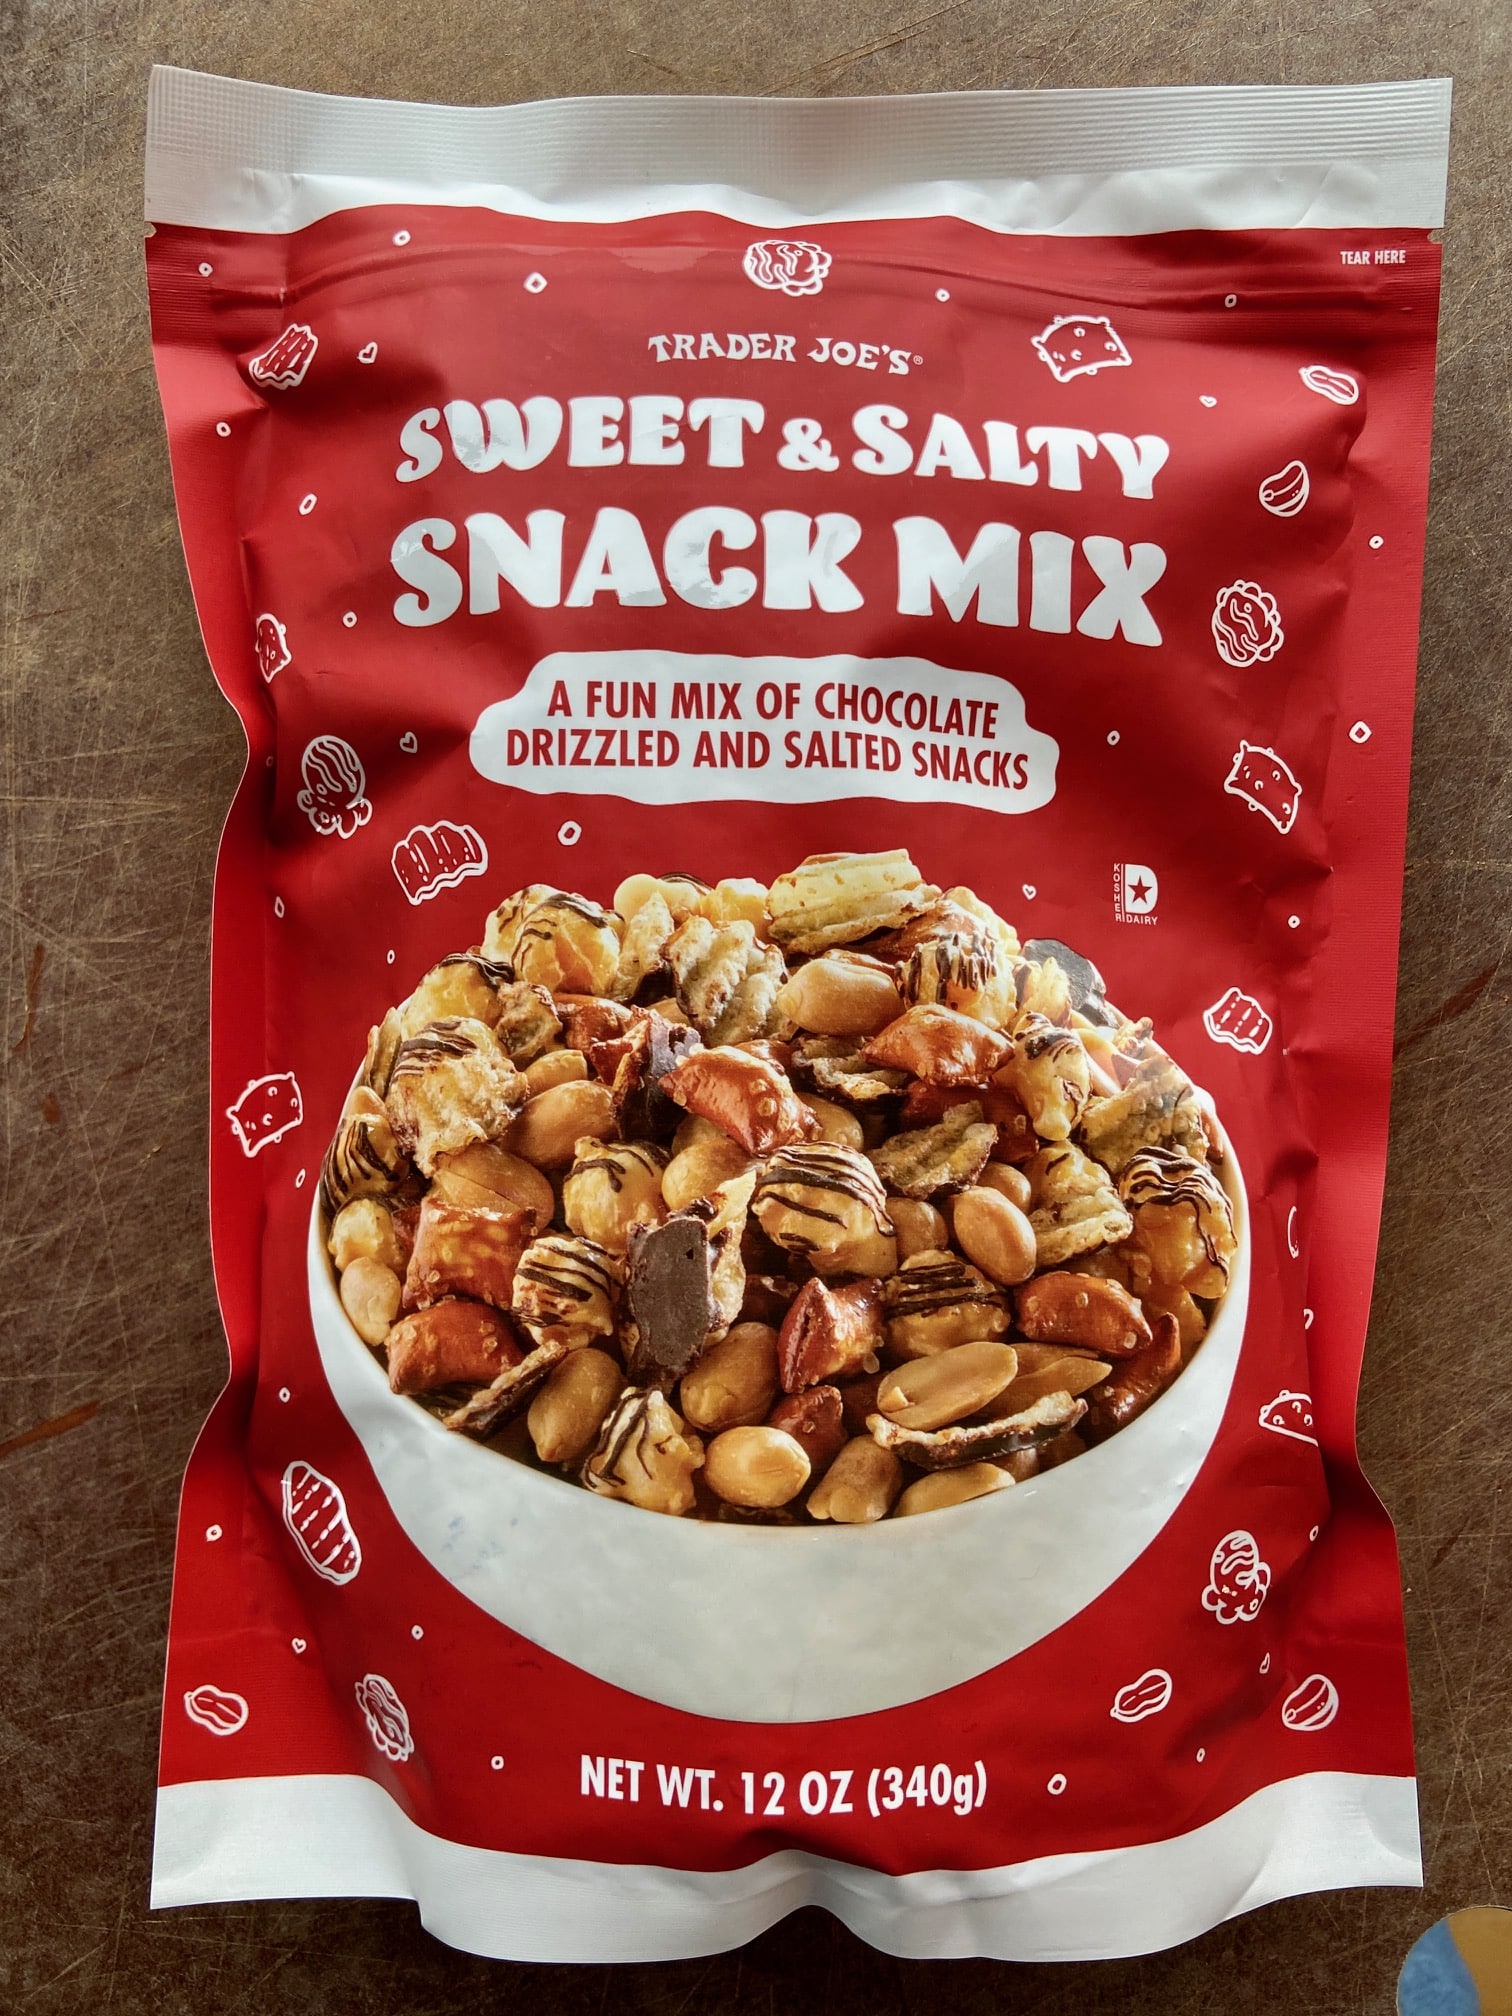 Trader Joe's Sweet and Salty Snack Mix